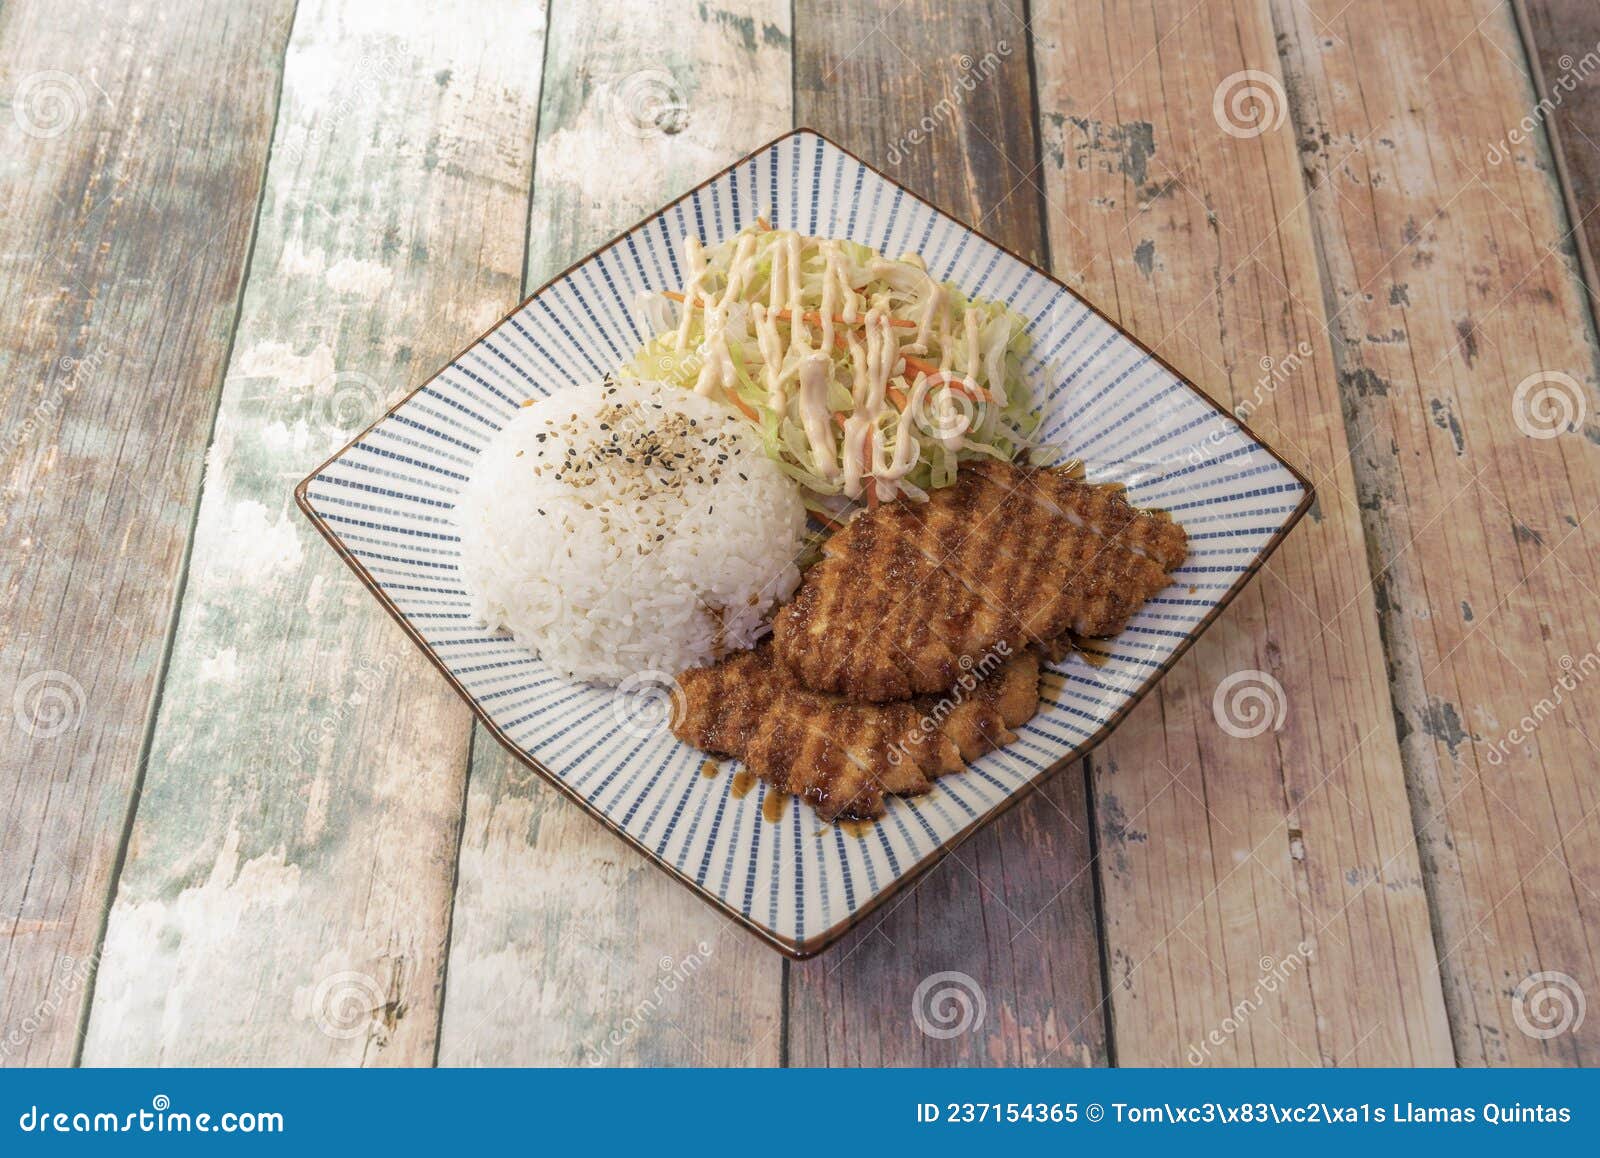 asian recipe for crispy pork tenderloin with yakitori sauce, vegetable salad and white rice with sesame